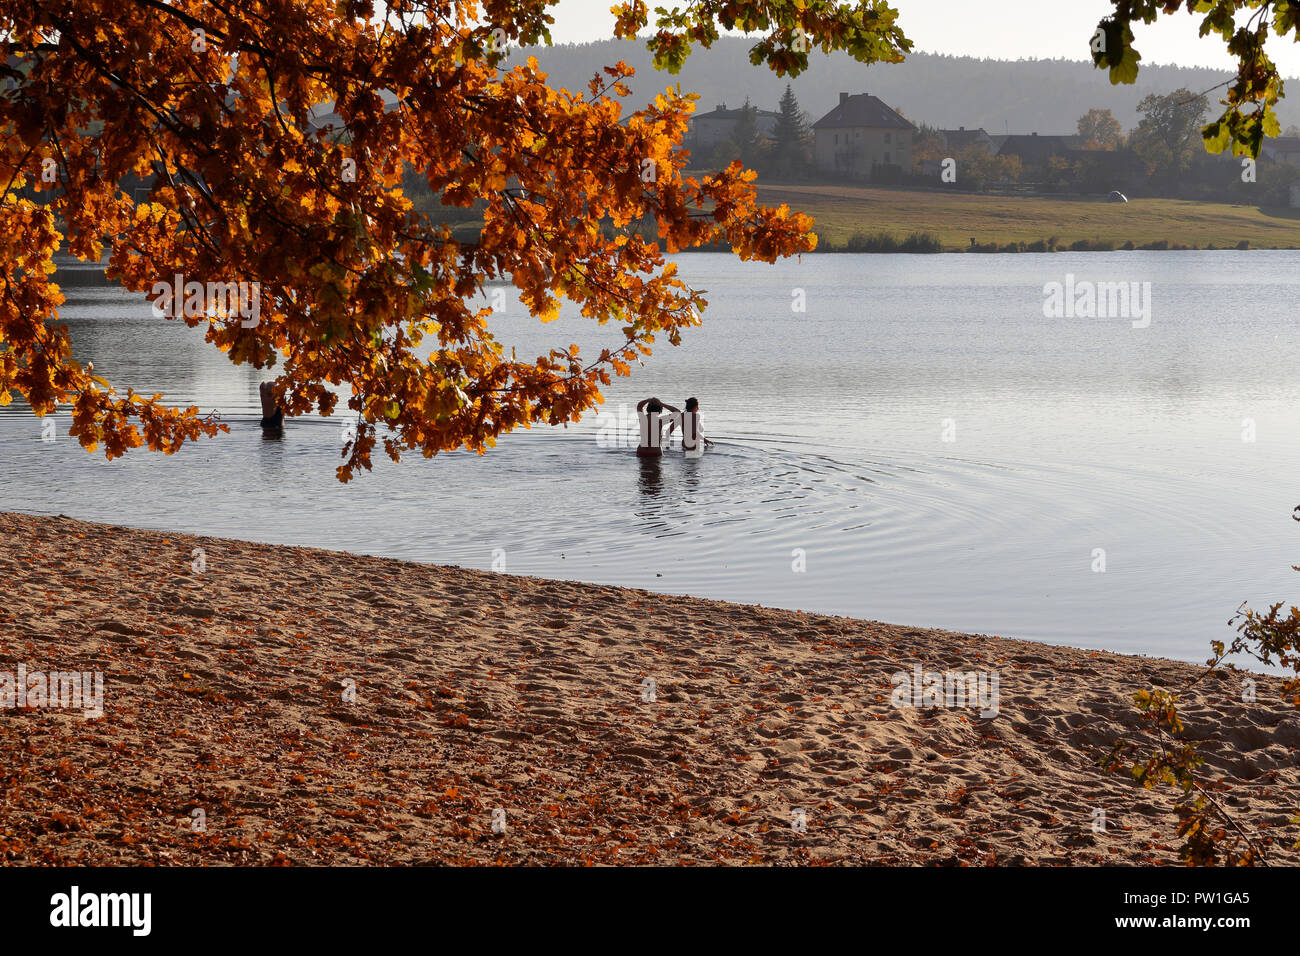 UMER, POLAND - OCTOBER 11, 2018: Women bathe in the lake during unusual warm spell of weather in October. © Slawomir Wojcik / Alamy Live News Stock Photo